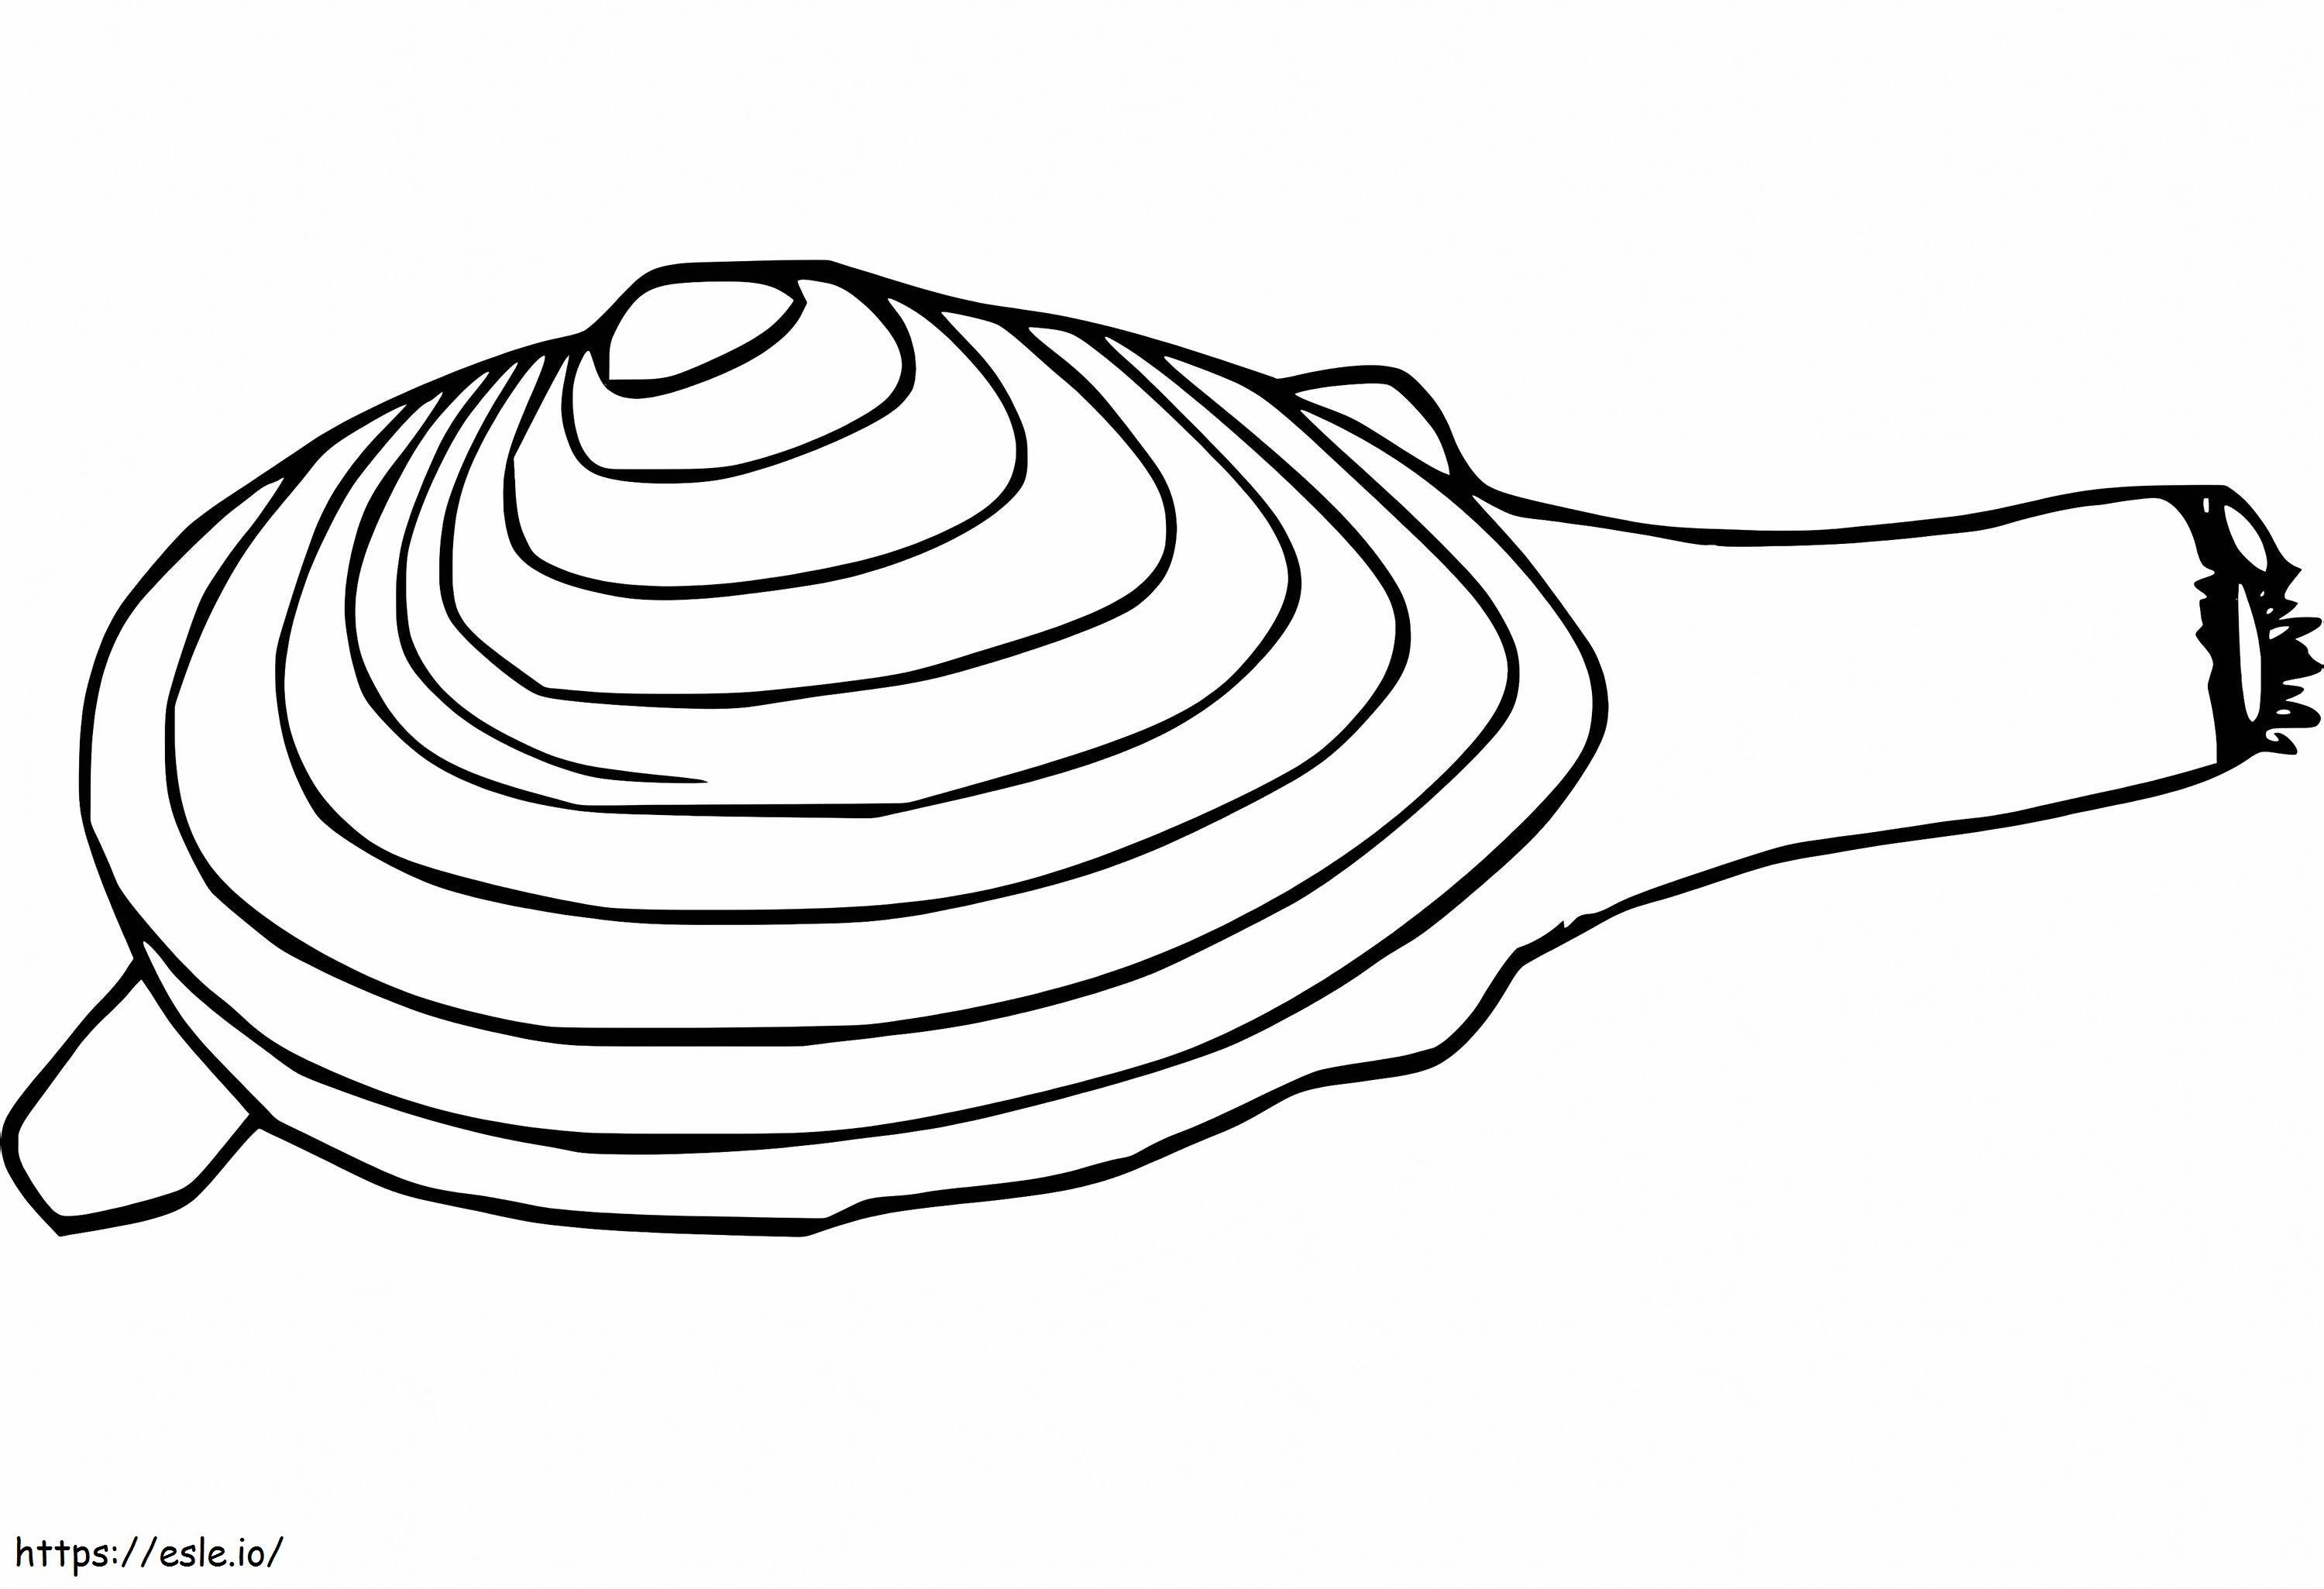 Pacific Geoduck coloring page